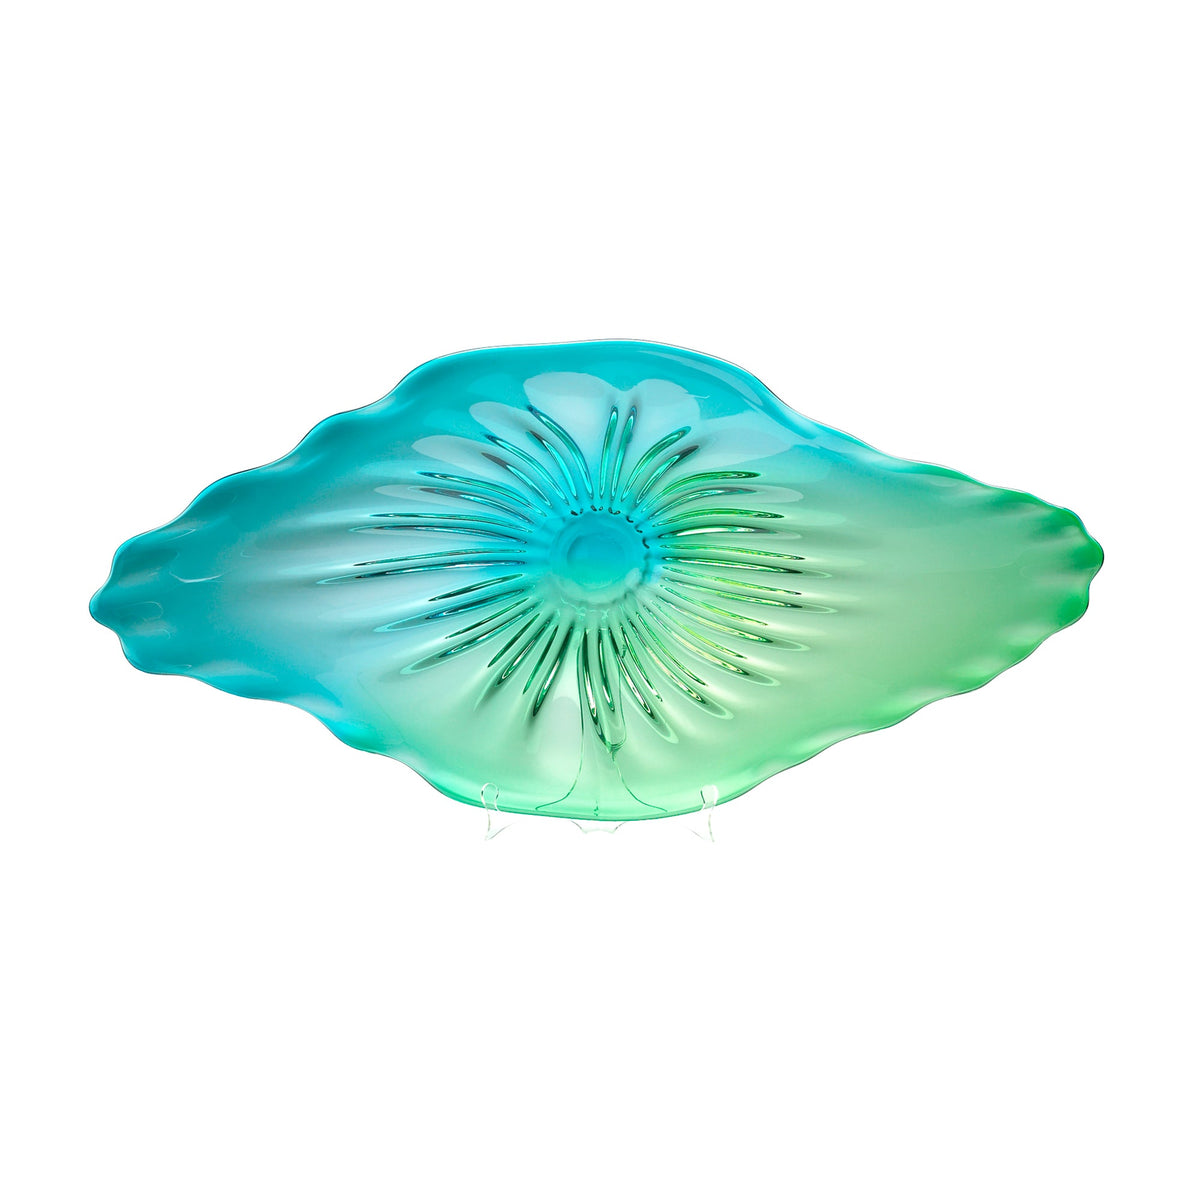 Art Glass Plate|Turquoise by Cyan